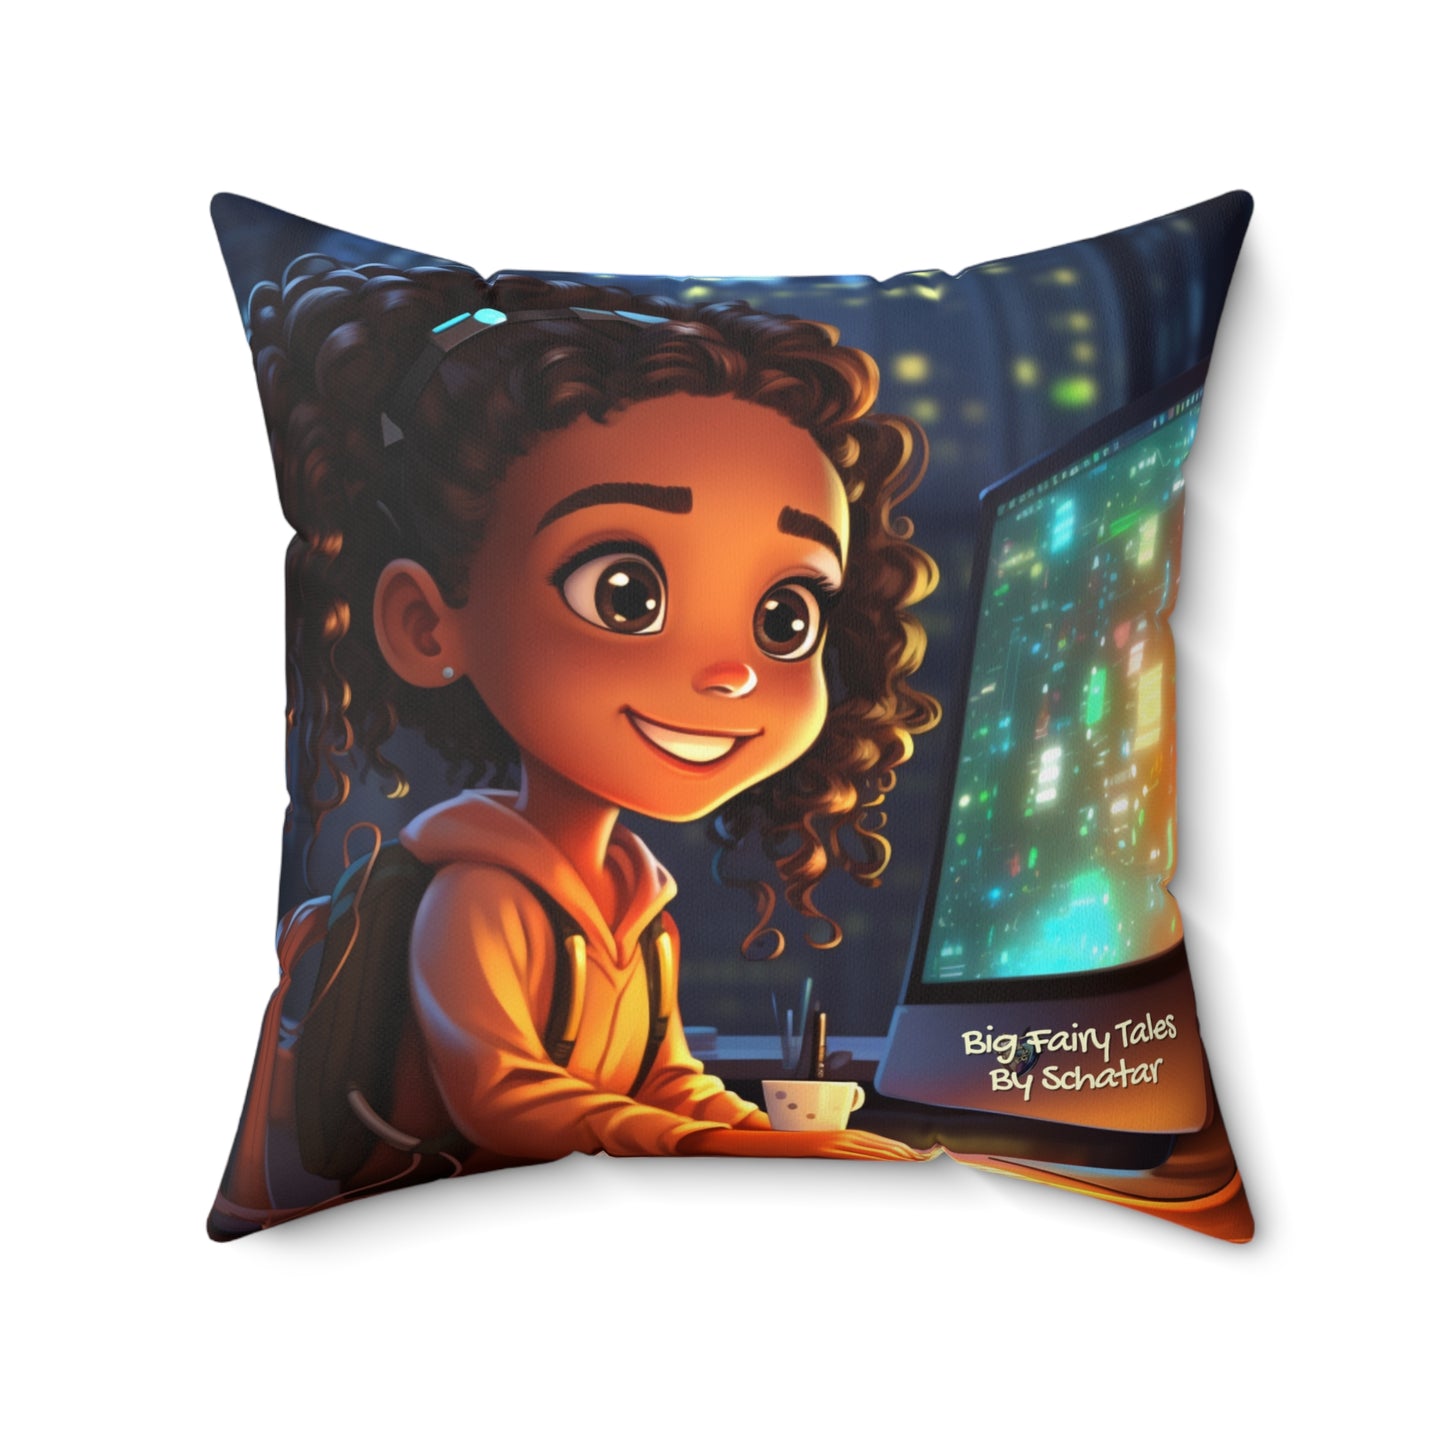 Prompt Engineer - Big Little Professionals Plush Pillow 16 From Big Fairy Tales By Schatar